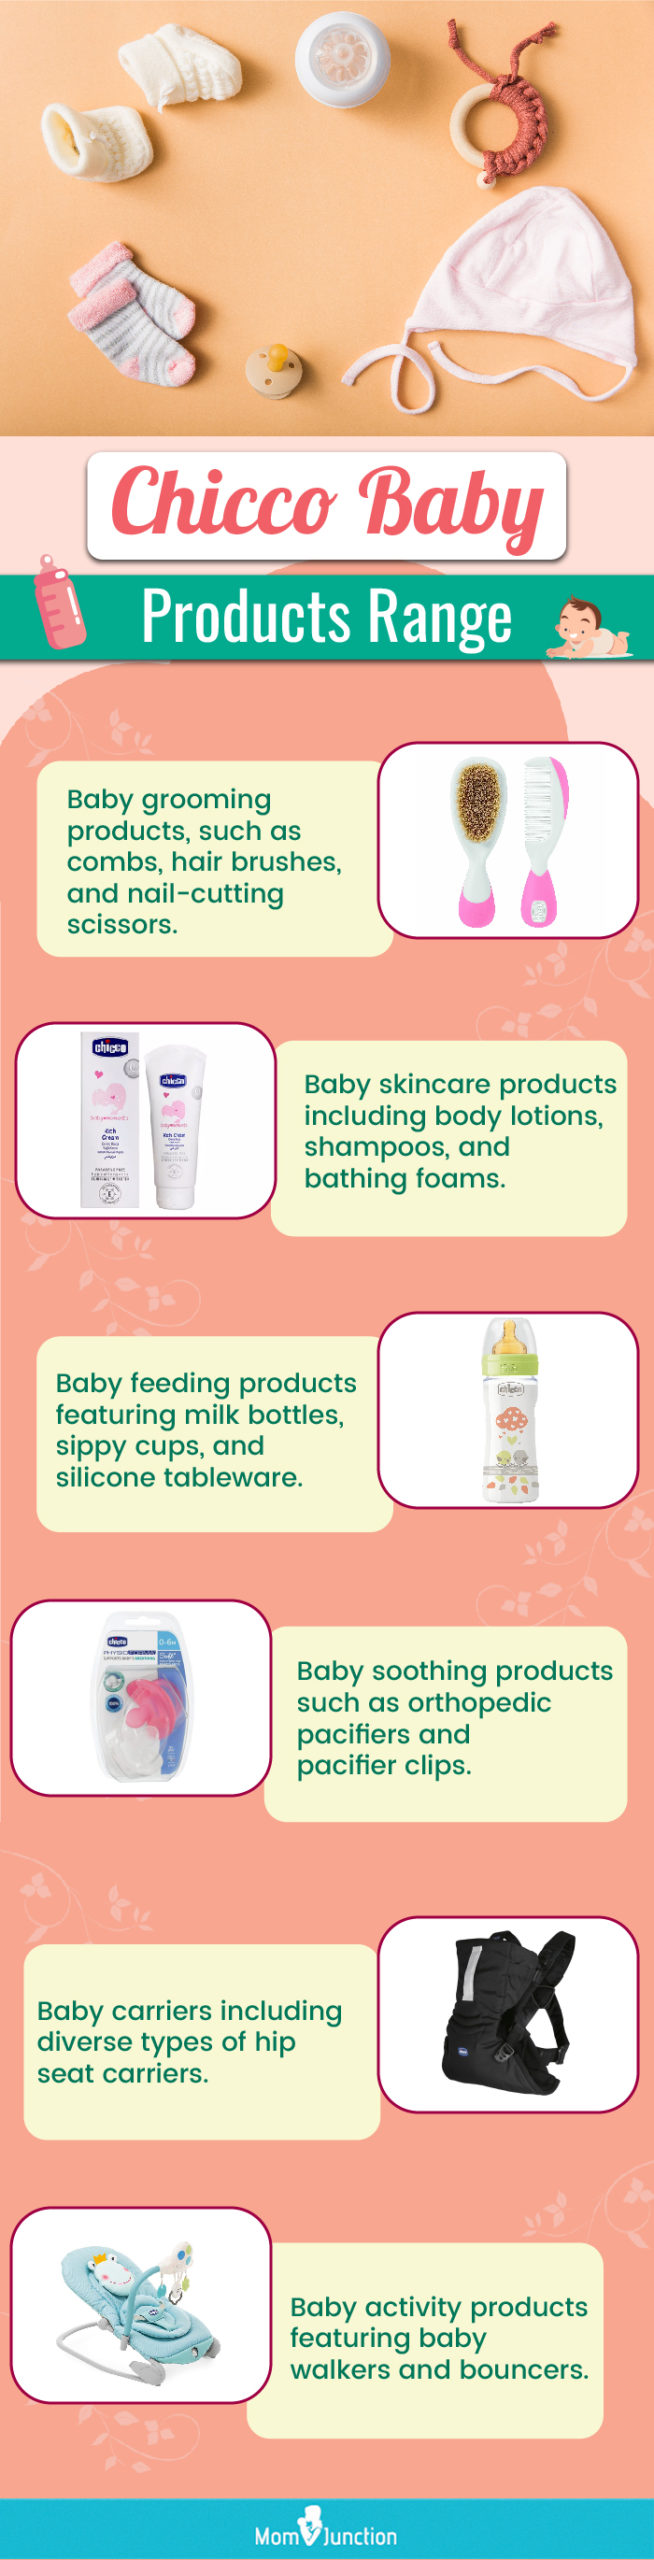 Chicco Baby Products Range (infographic)